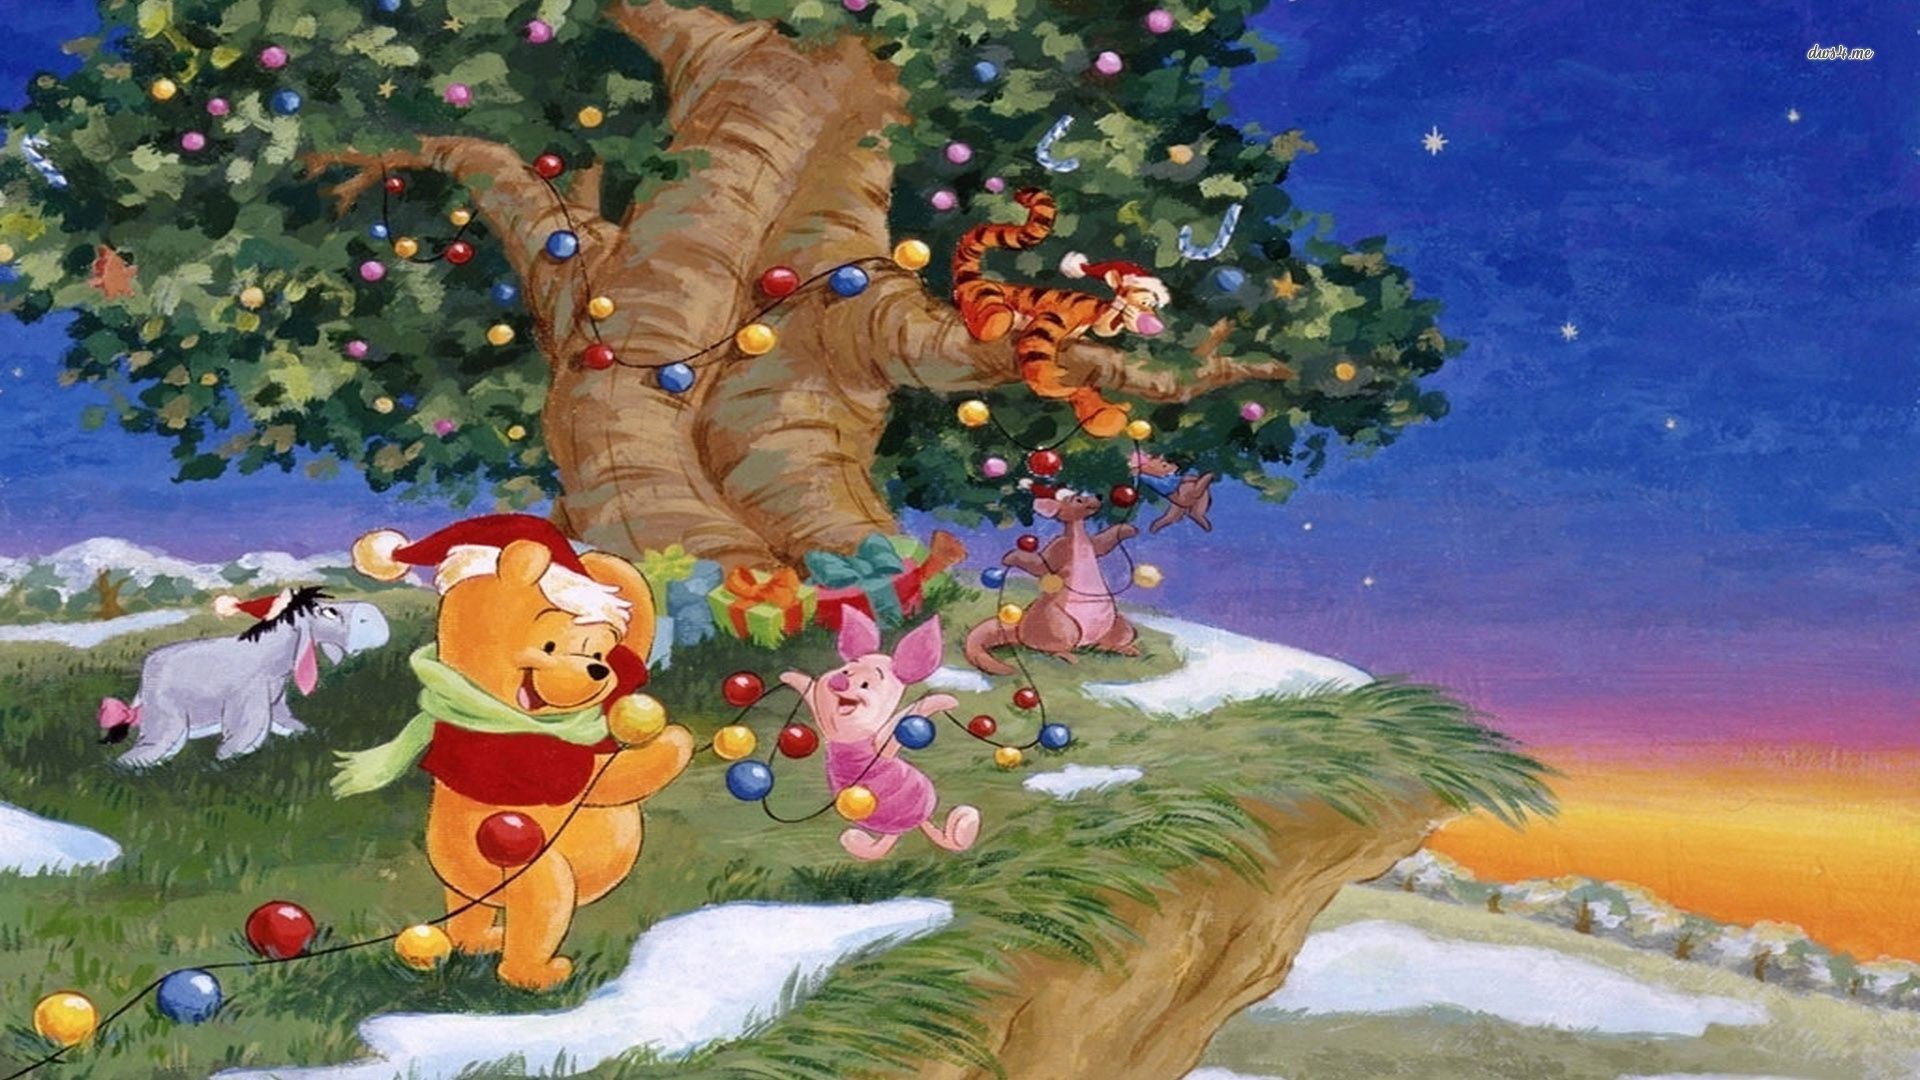 1920x1080 ... Wallpapers Winnie The Pooh Wallpaper 7 - Best FREE Wallpaper Collection  ...